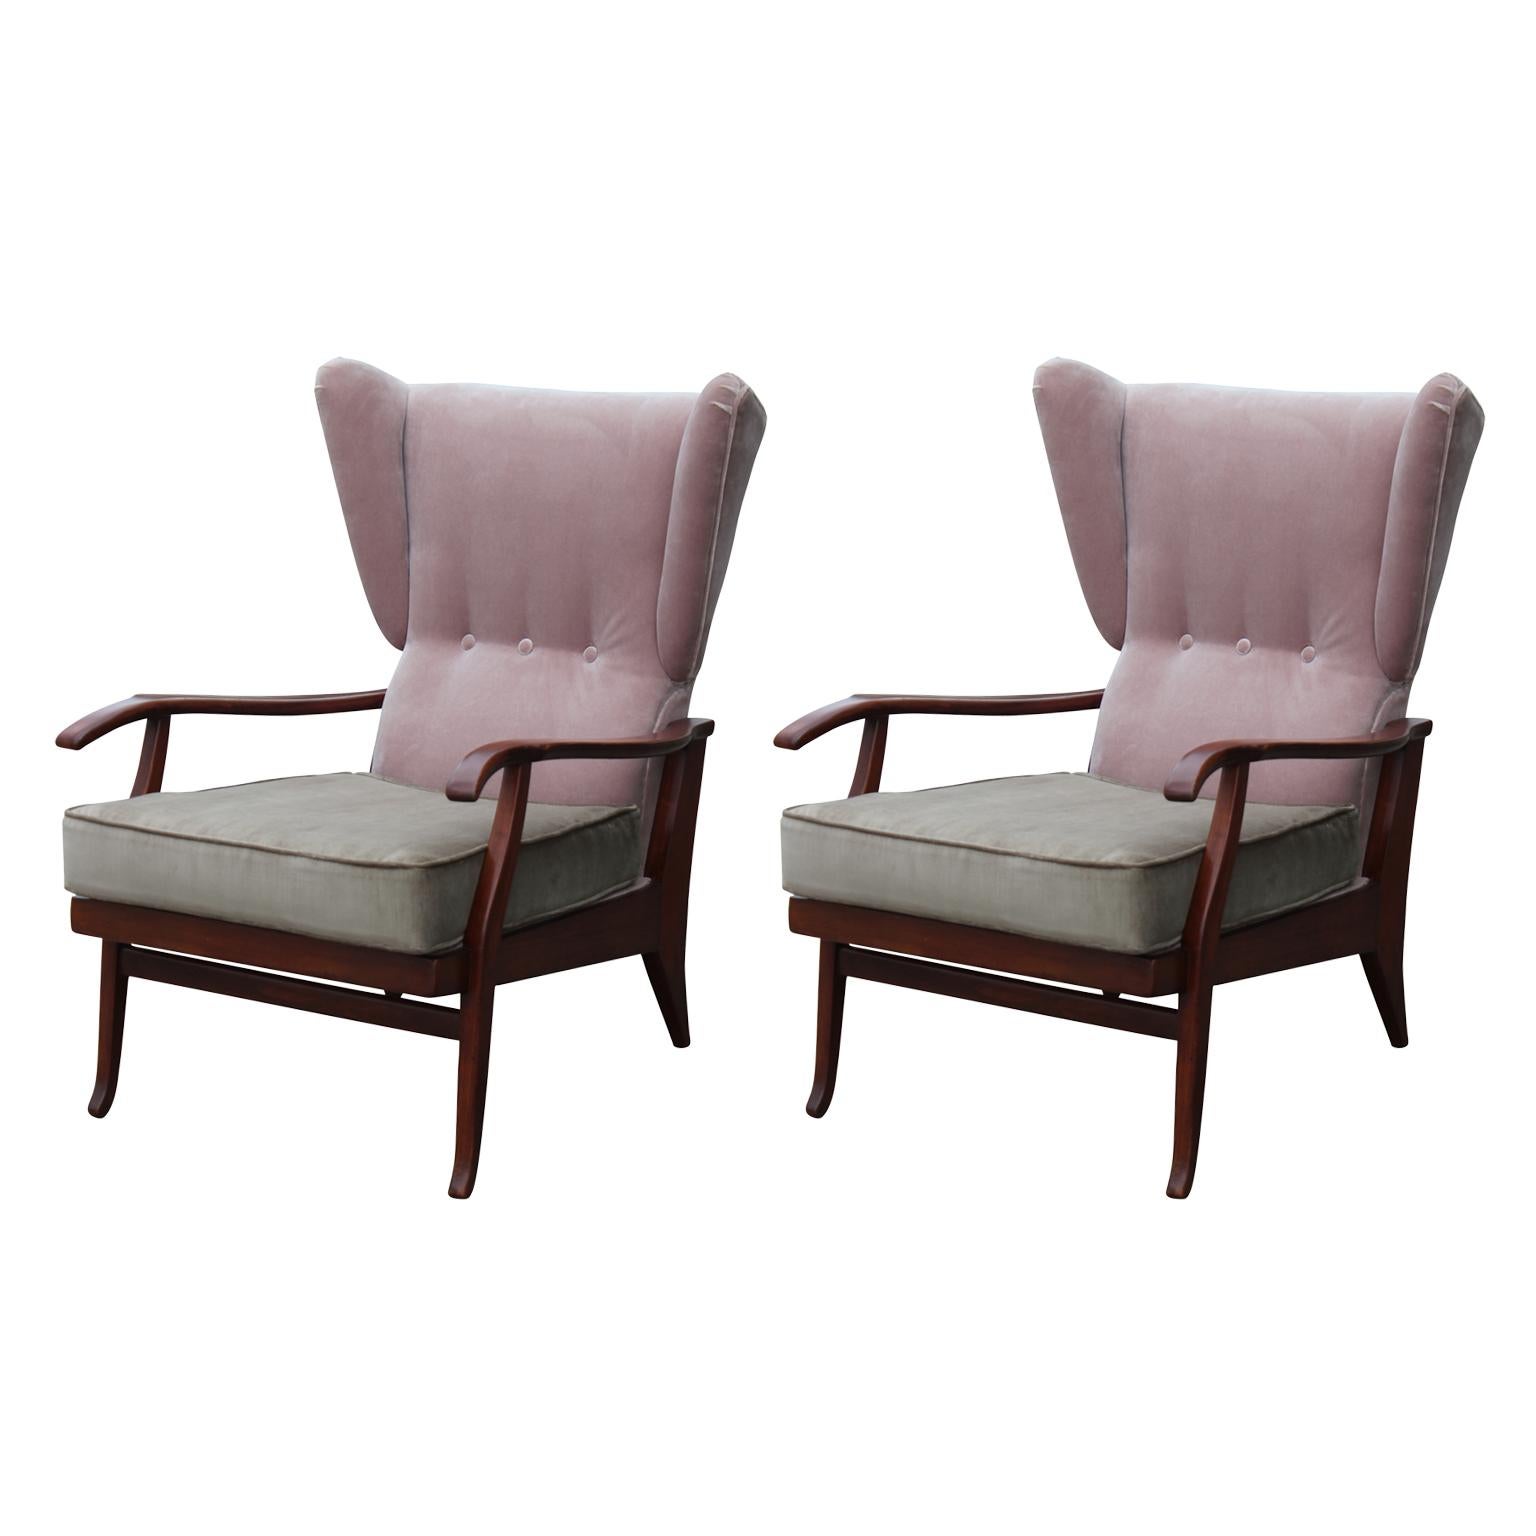 Pair of Modern Pink & Taupe Italian Wingback Reclining Chairs Paolo Buffa Style